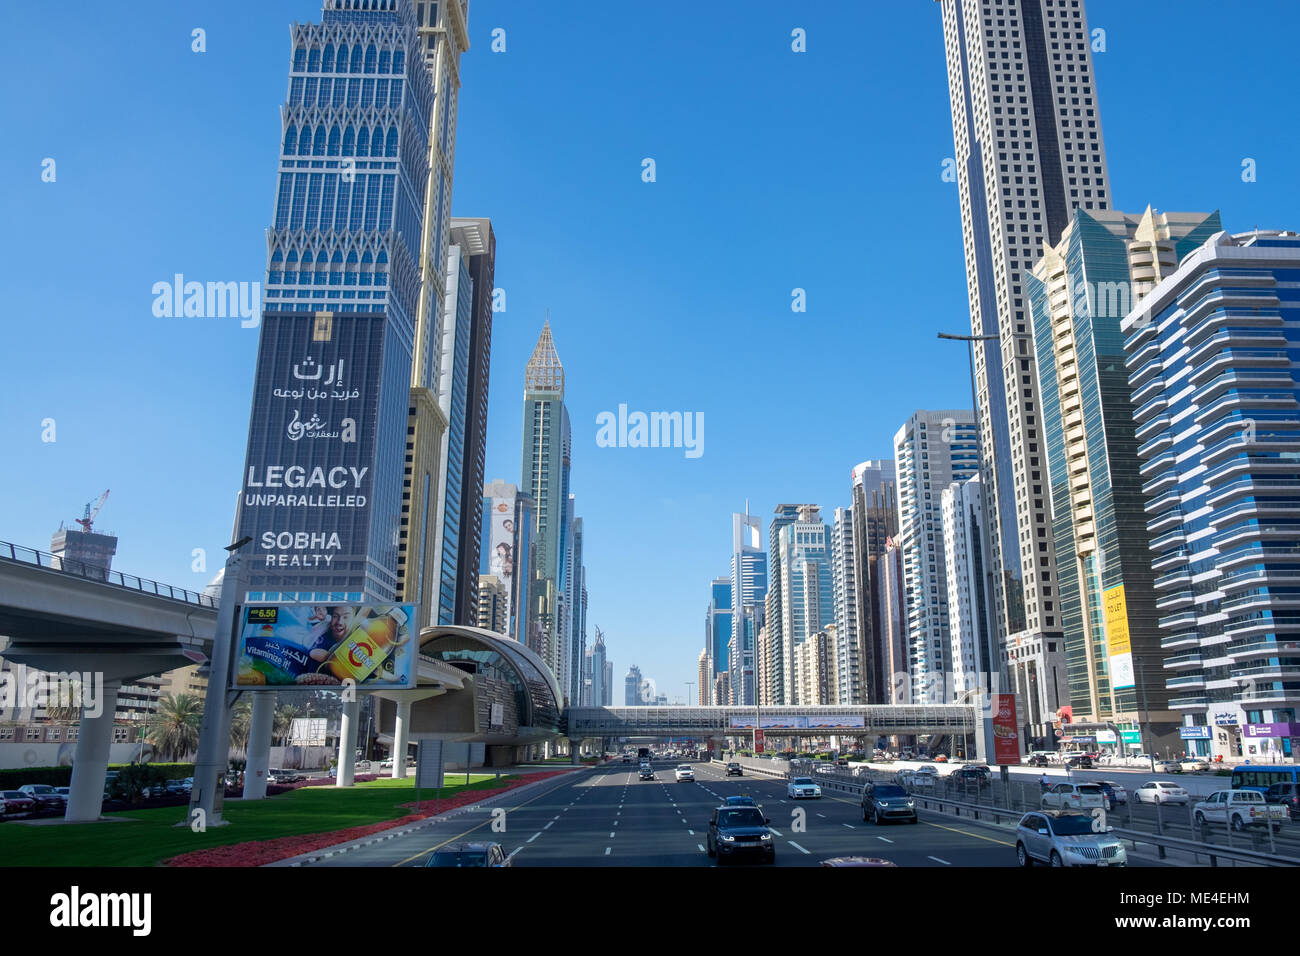 The view from Sheikh Zayed Road taken from a city tour bus Stock Photo